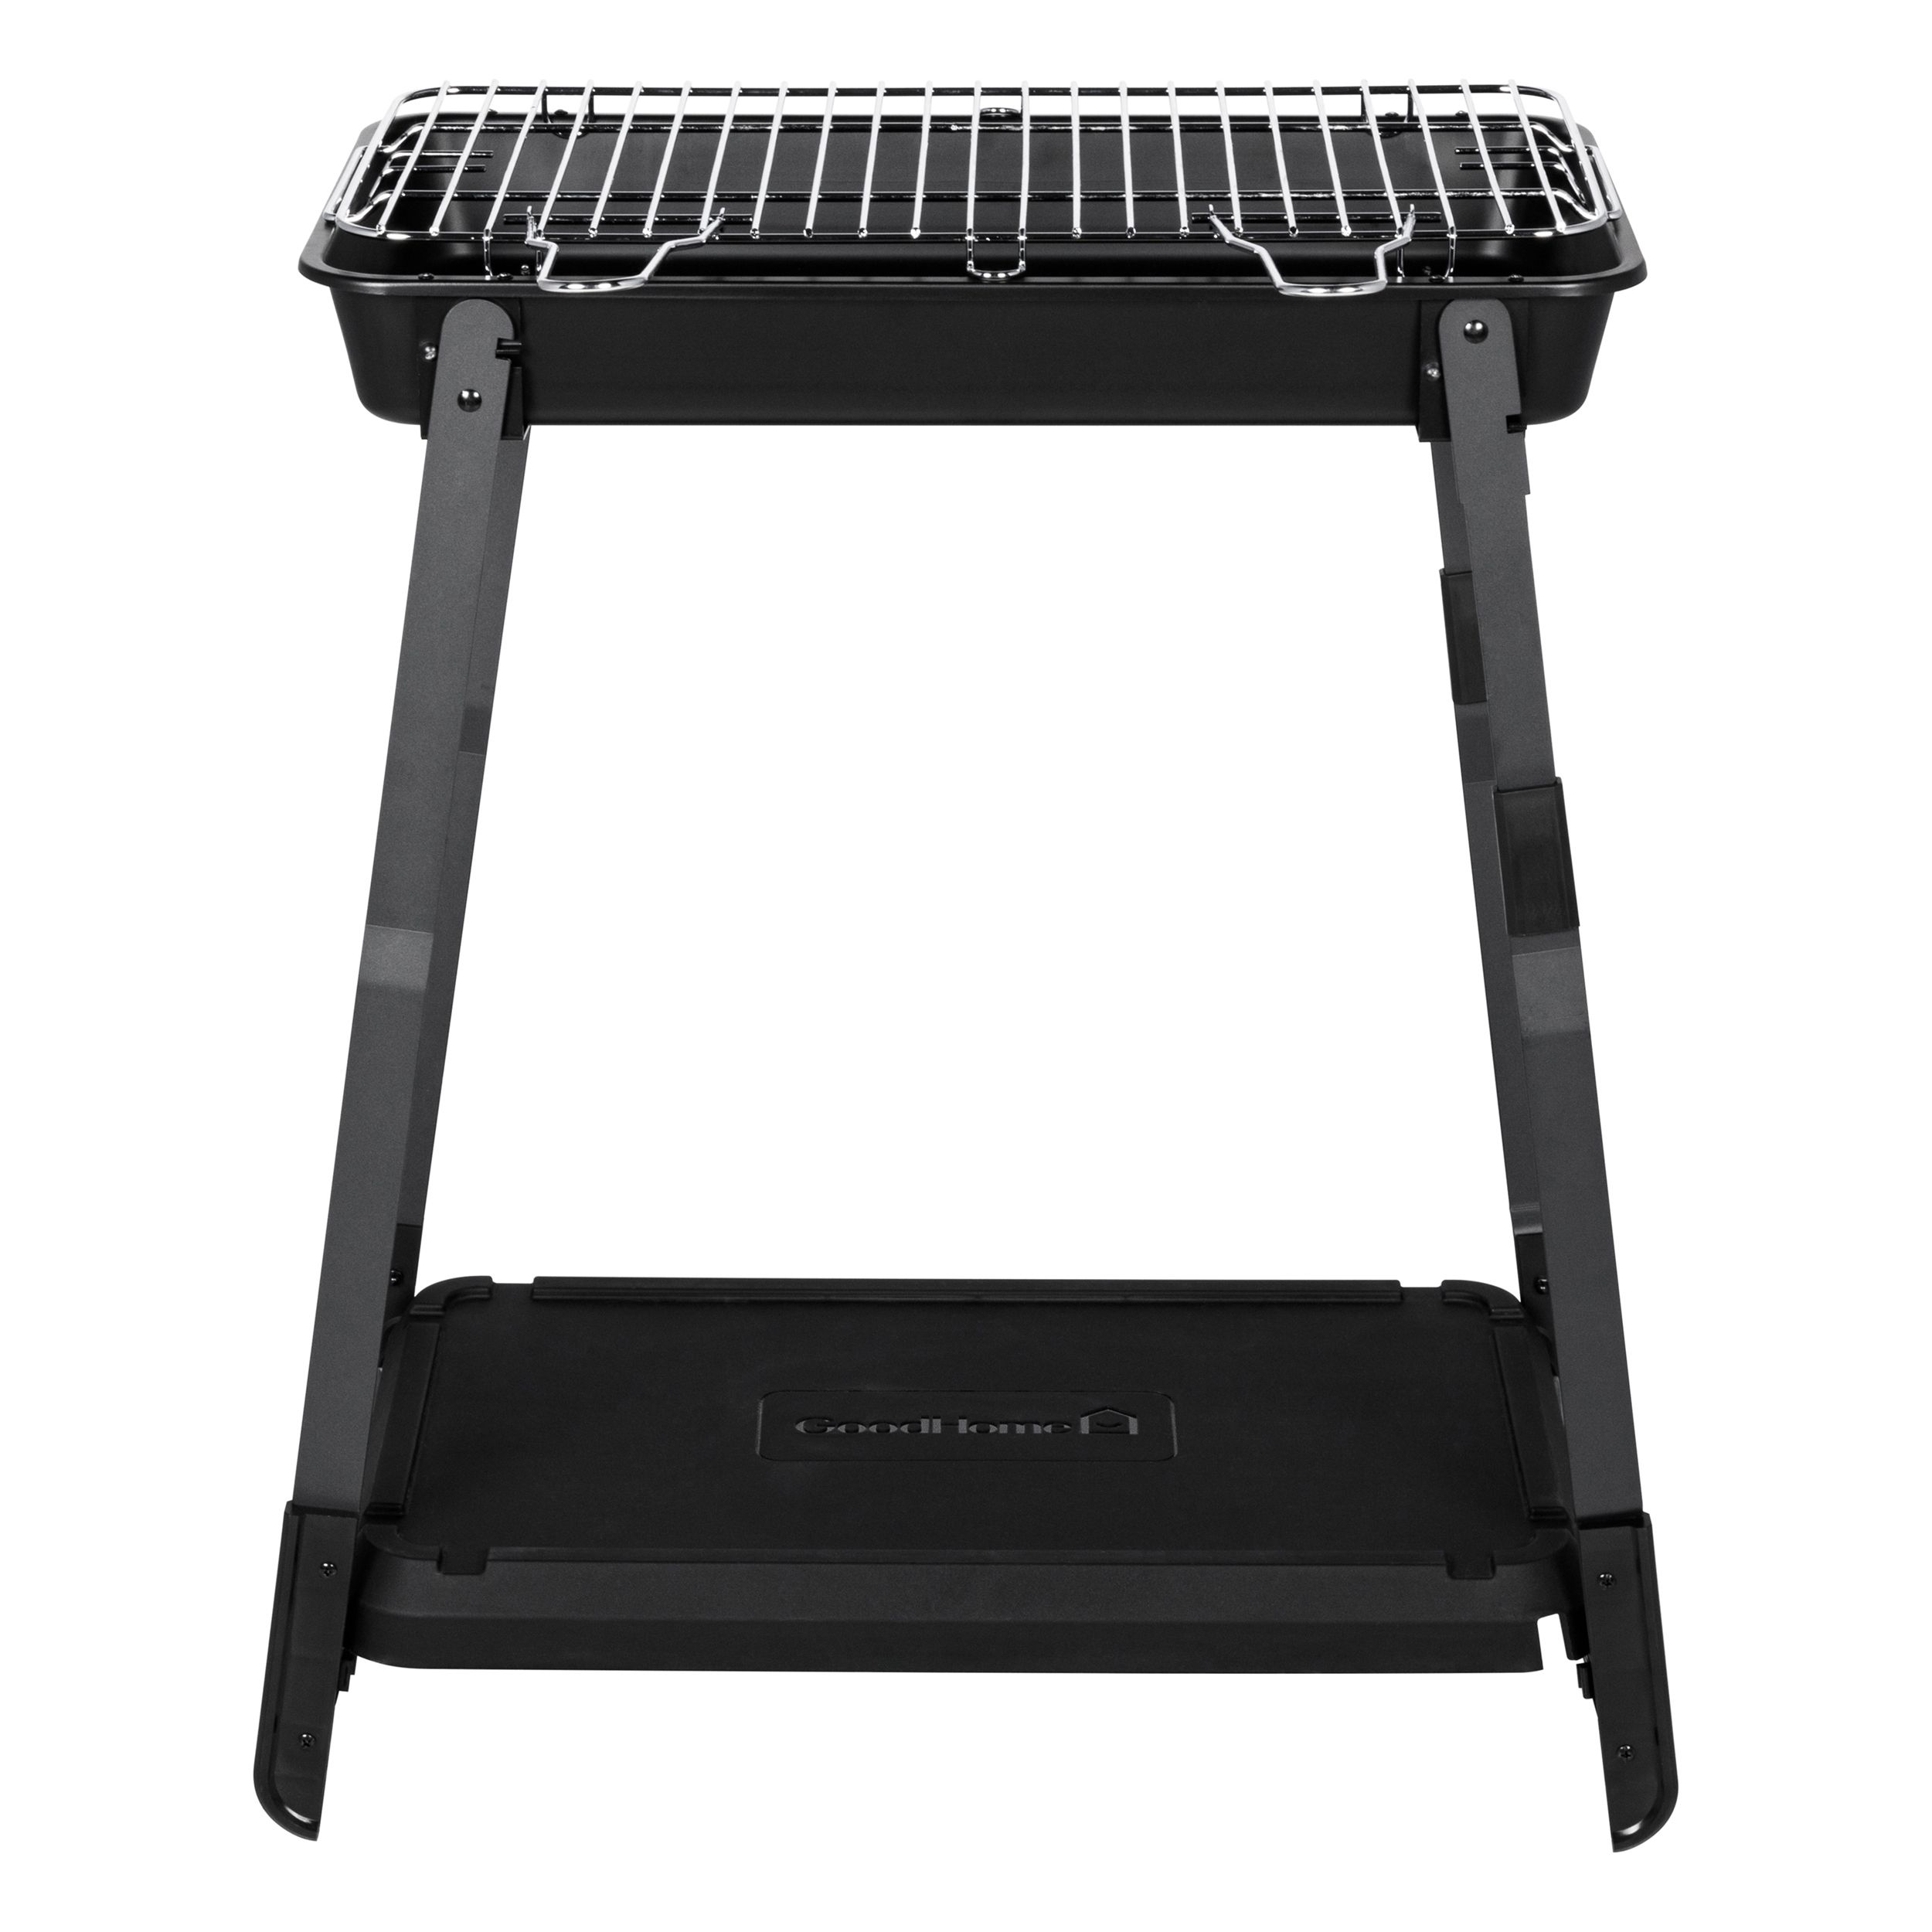 GoodHome Hensen Compact Black Charcoal Barbecue